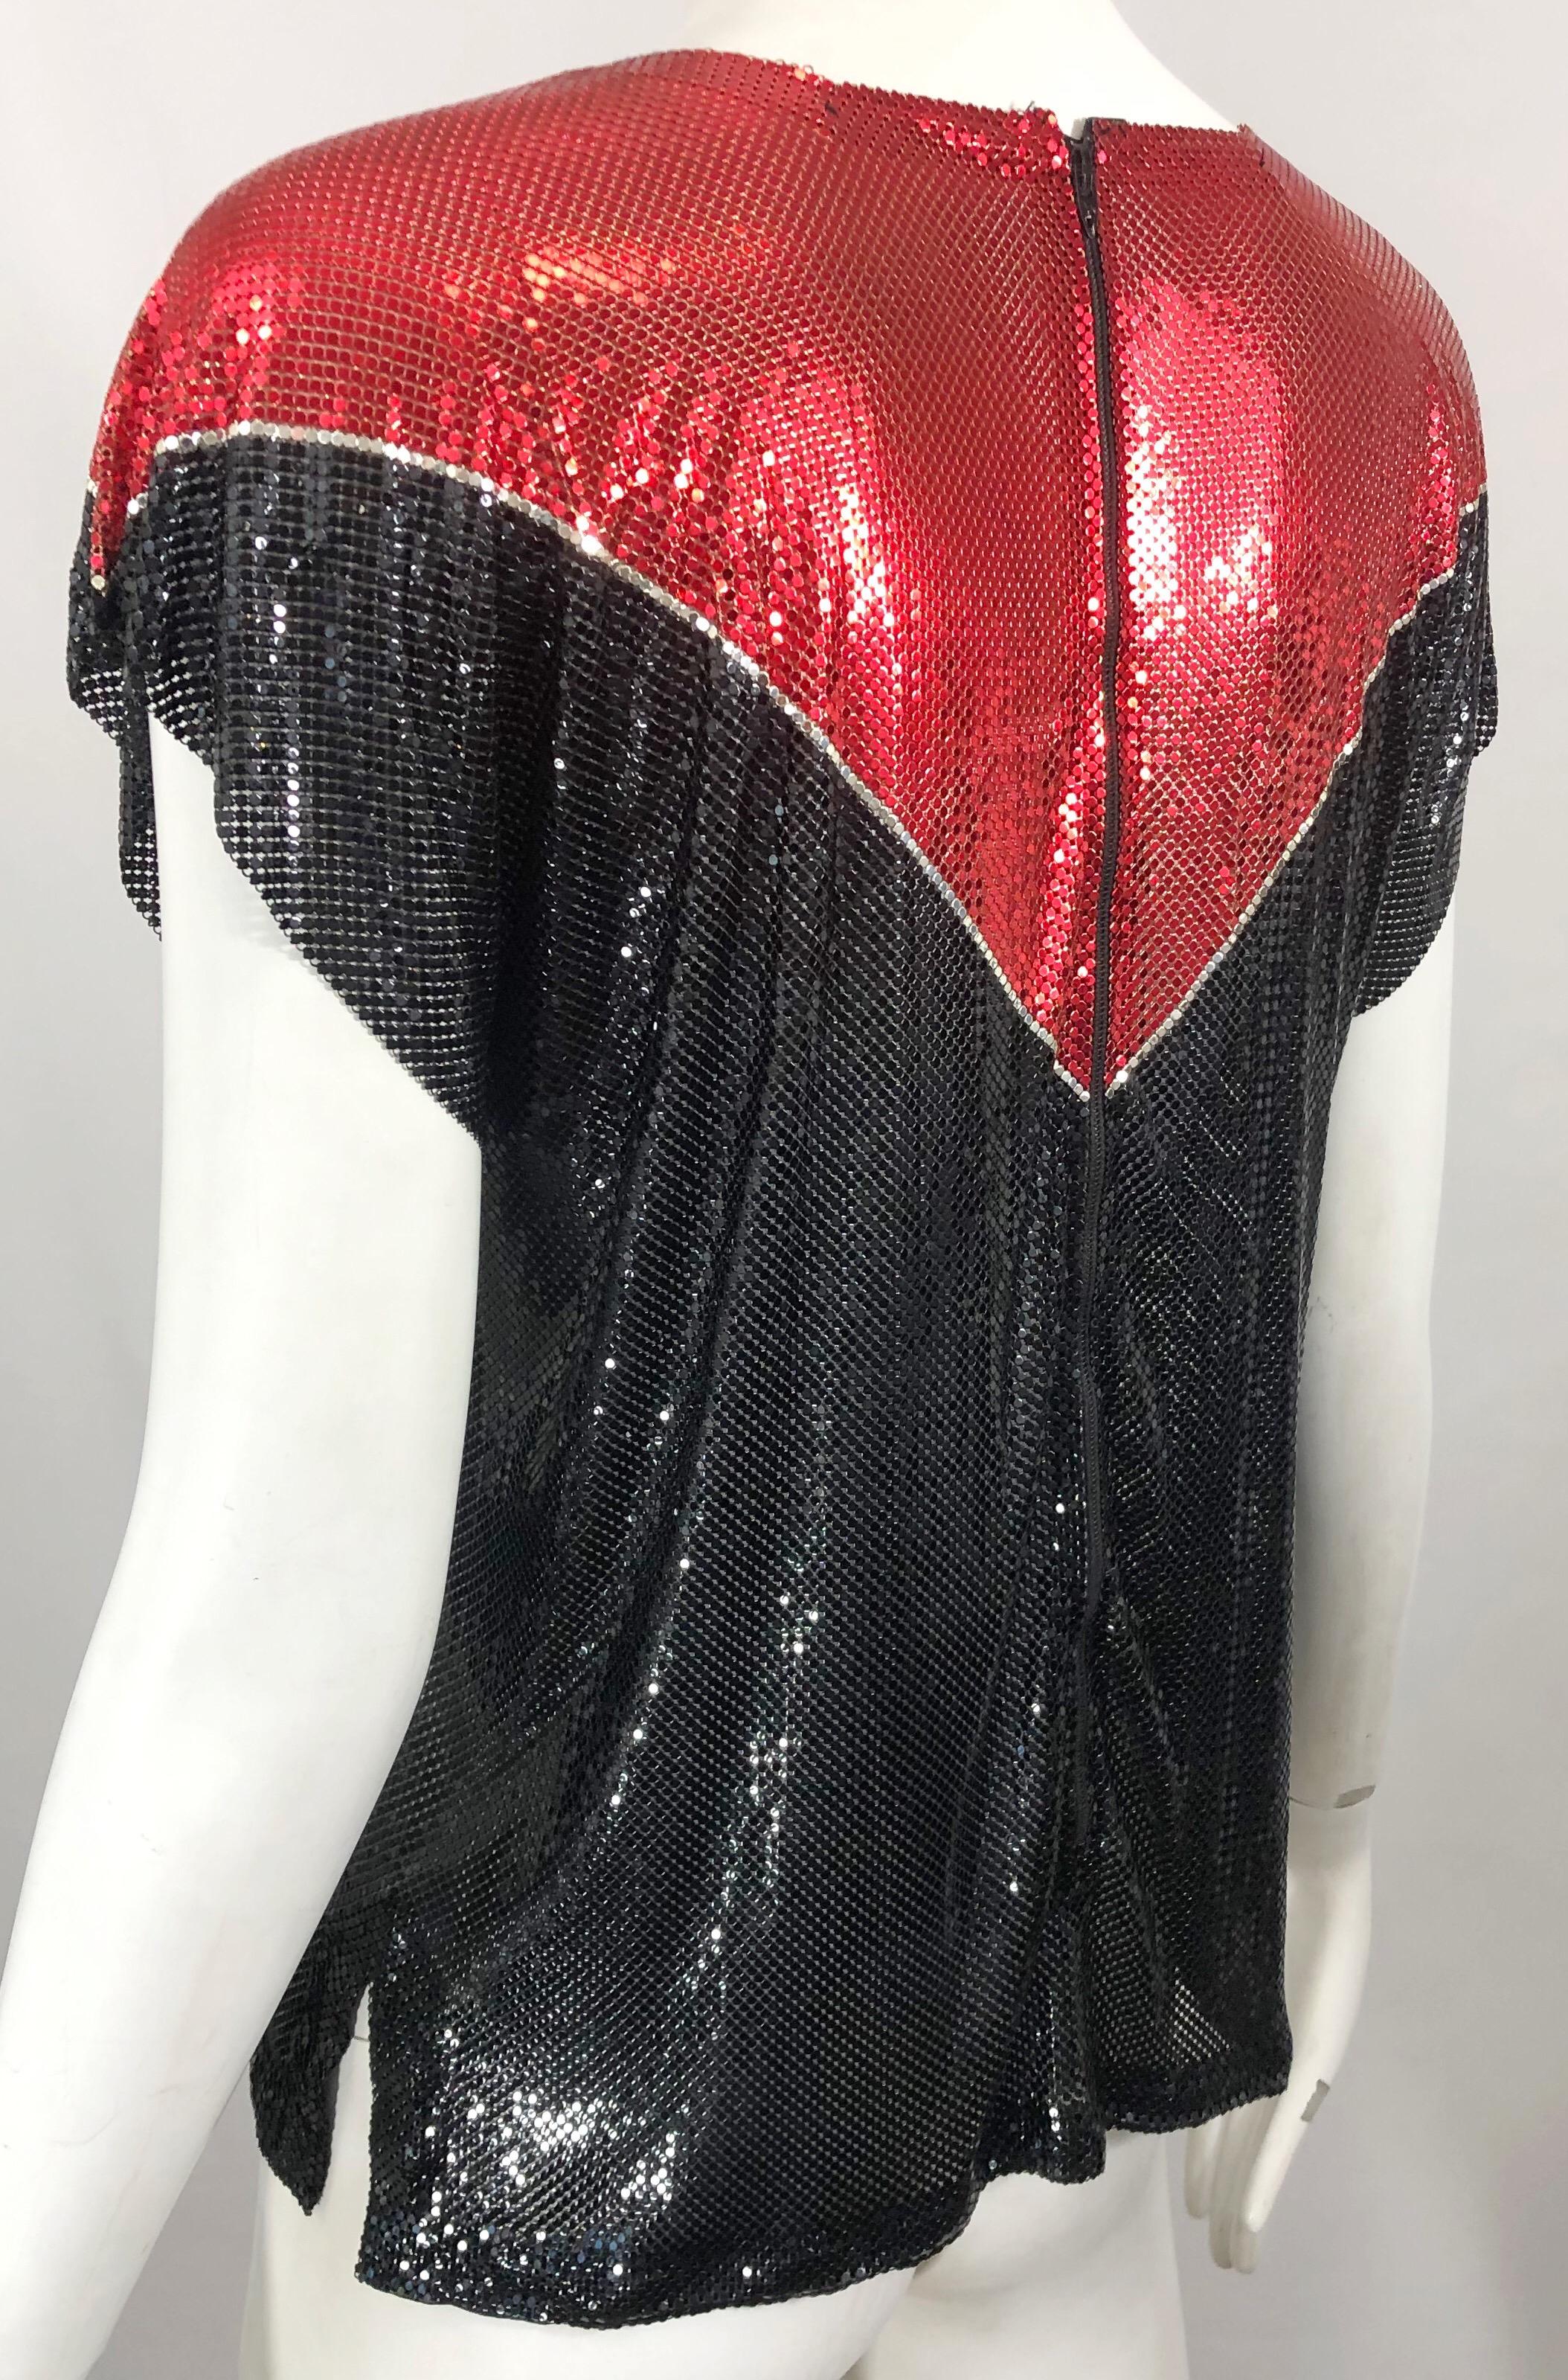 Avant Garde 1970s Whiting & Davis Red + Black + Silver Chainmail Metal Mesh Top In Excellent Condition For Sale In San Diego, CA